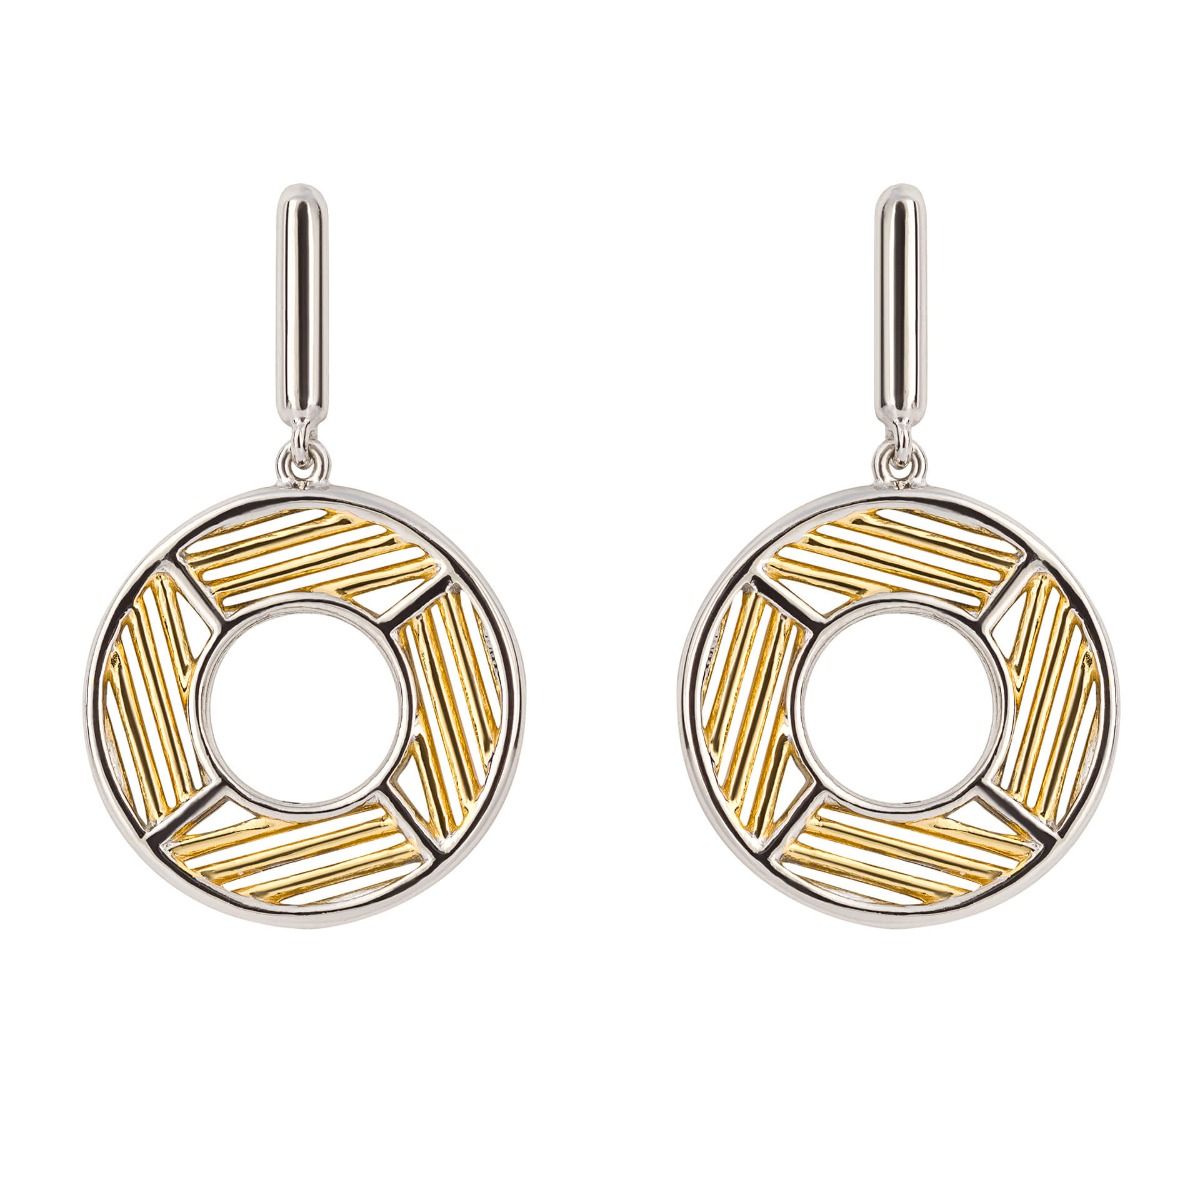 Fiorelli round two tone sterling silver drop earrings